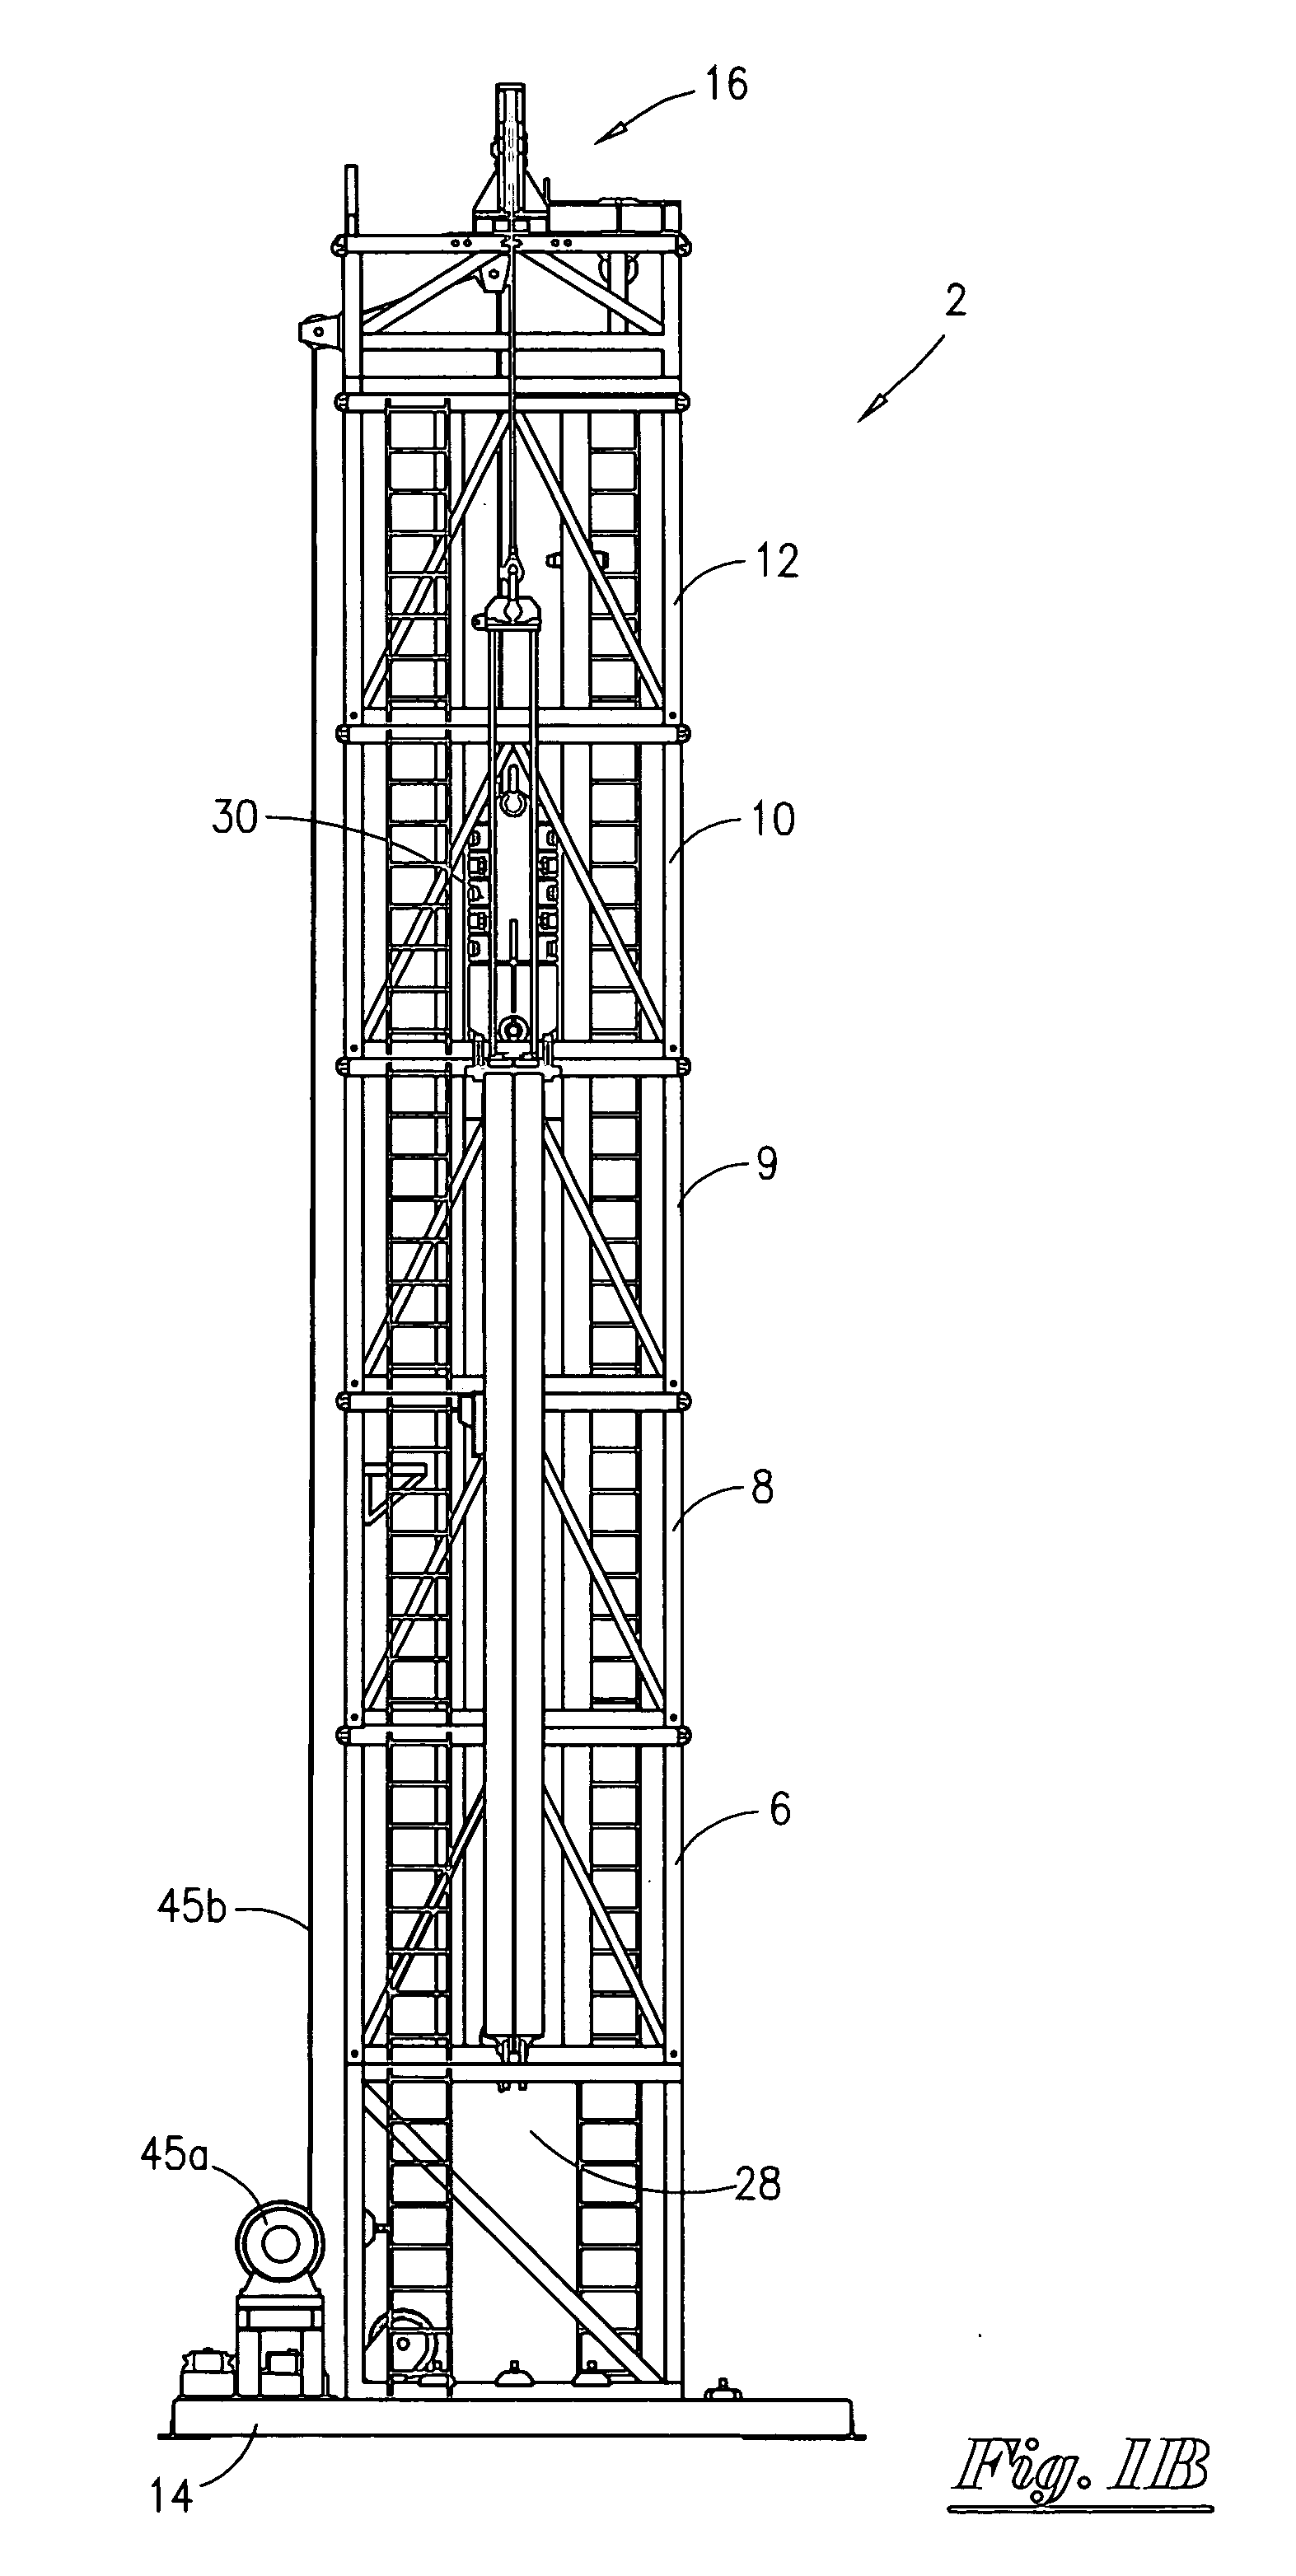 Apparatus for performing well work on floating platform